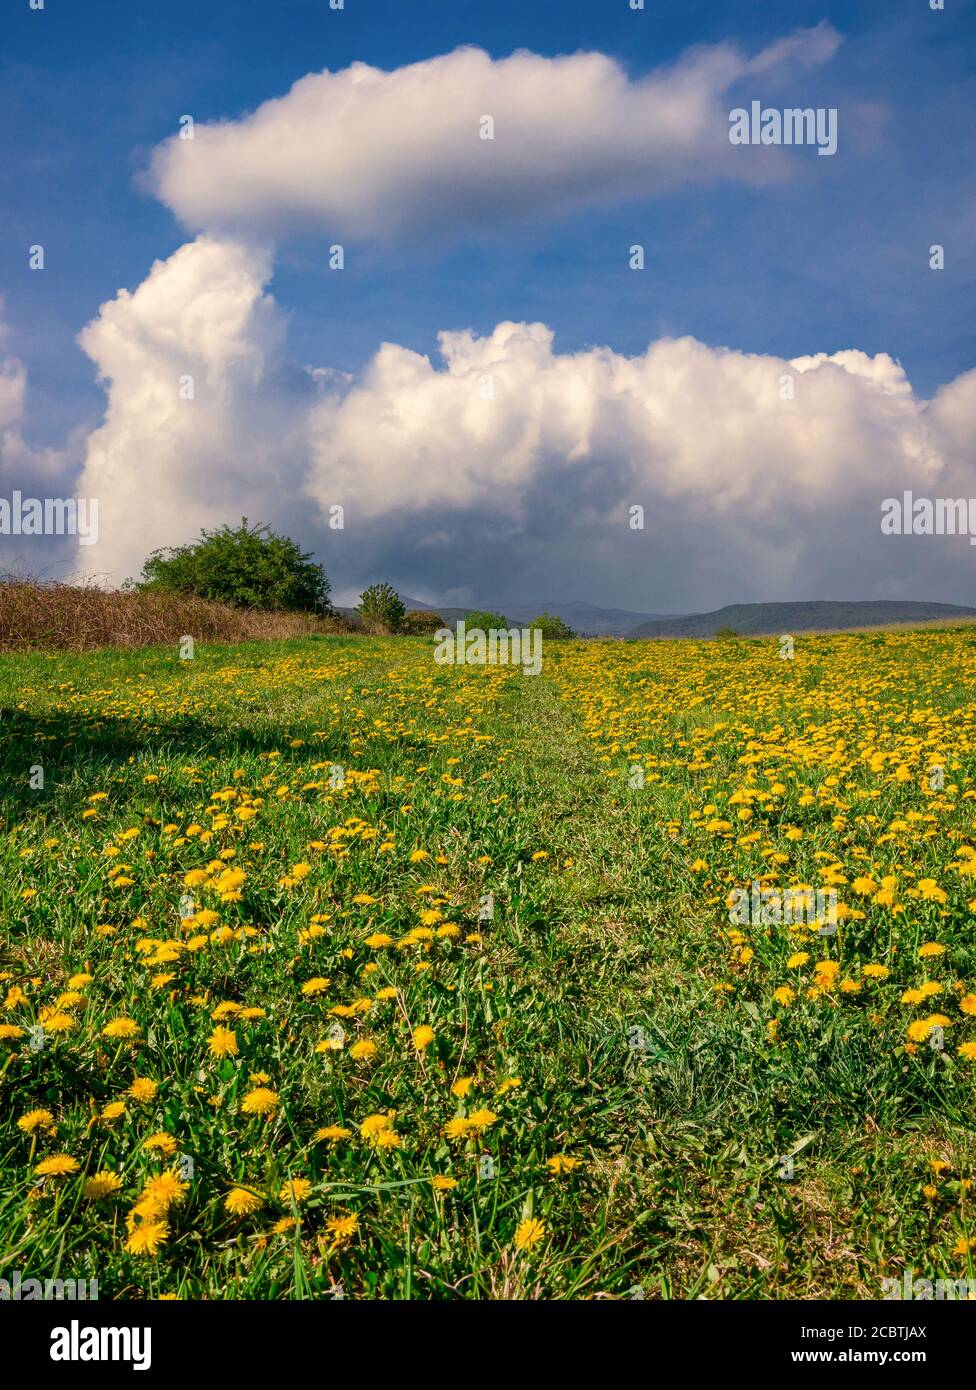 Footpath on a meadow with dandelions(Taraxacum officinale), under a blue sky with a massive cloud Stock Photo